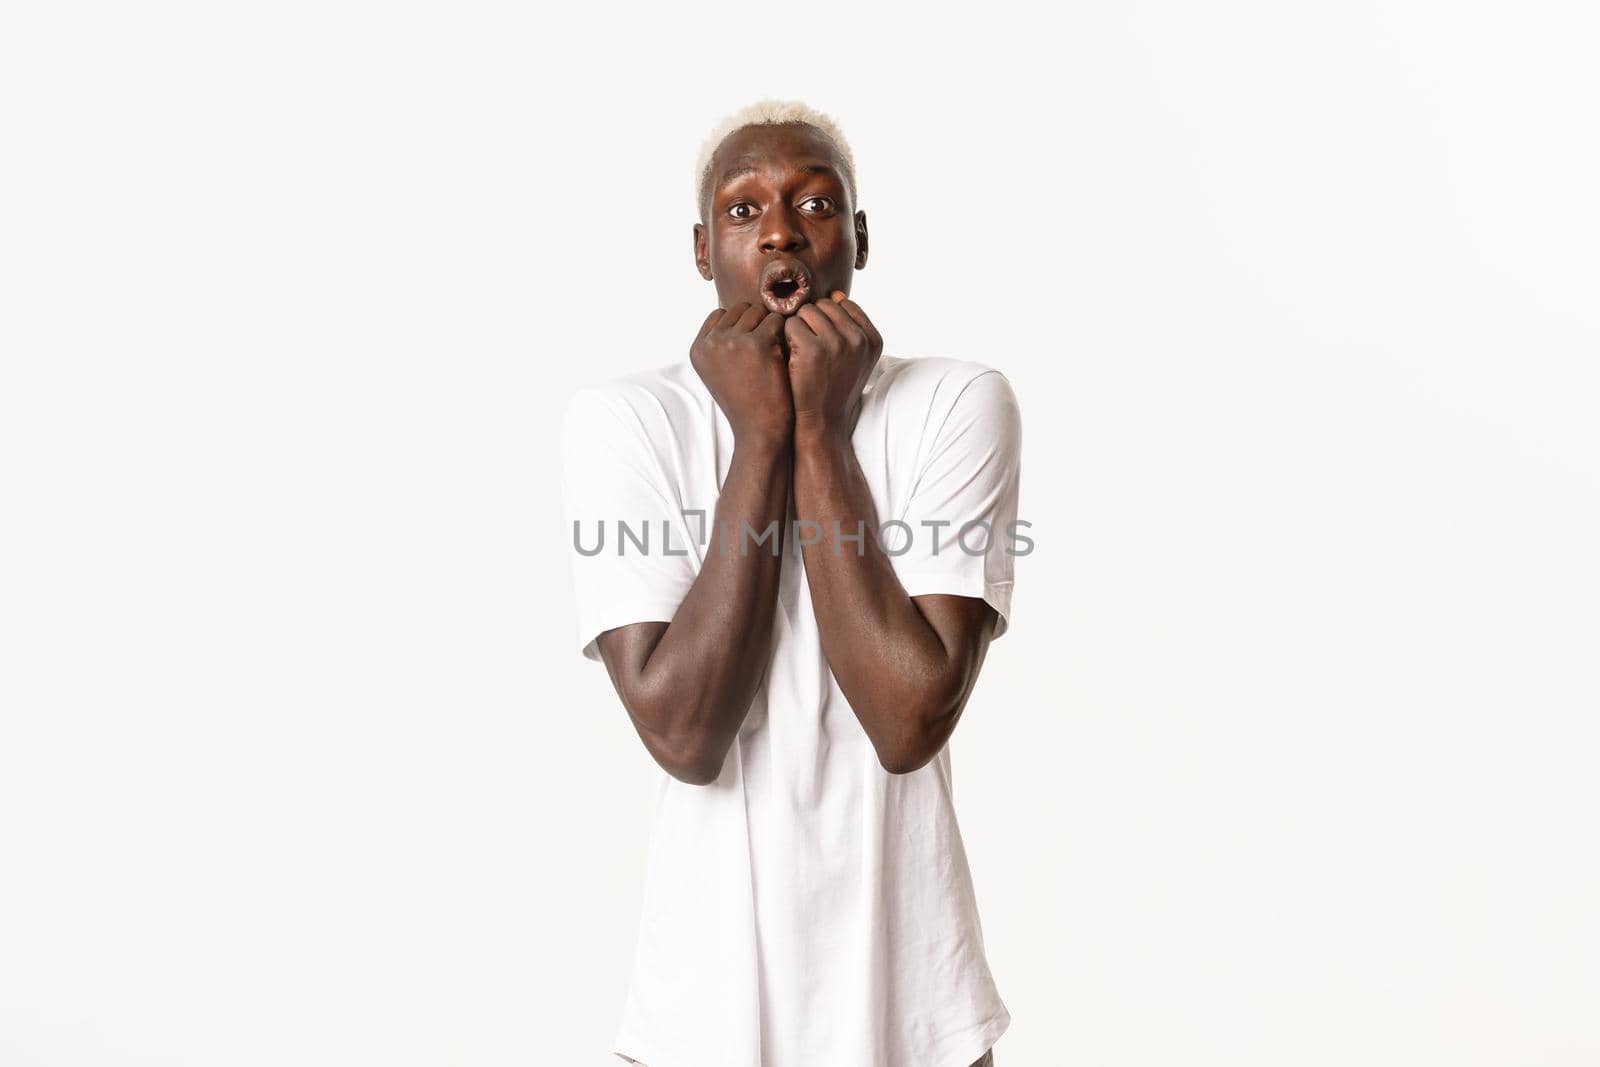 Portrait of amazed and fascinated african-american blond man, gasping excited, holding hands pressed to face, looking at camera thrilled, standing white background.